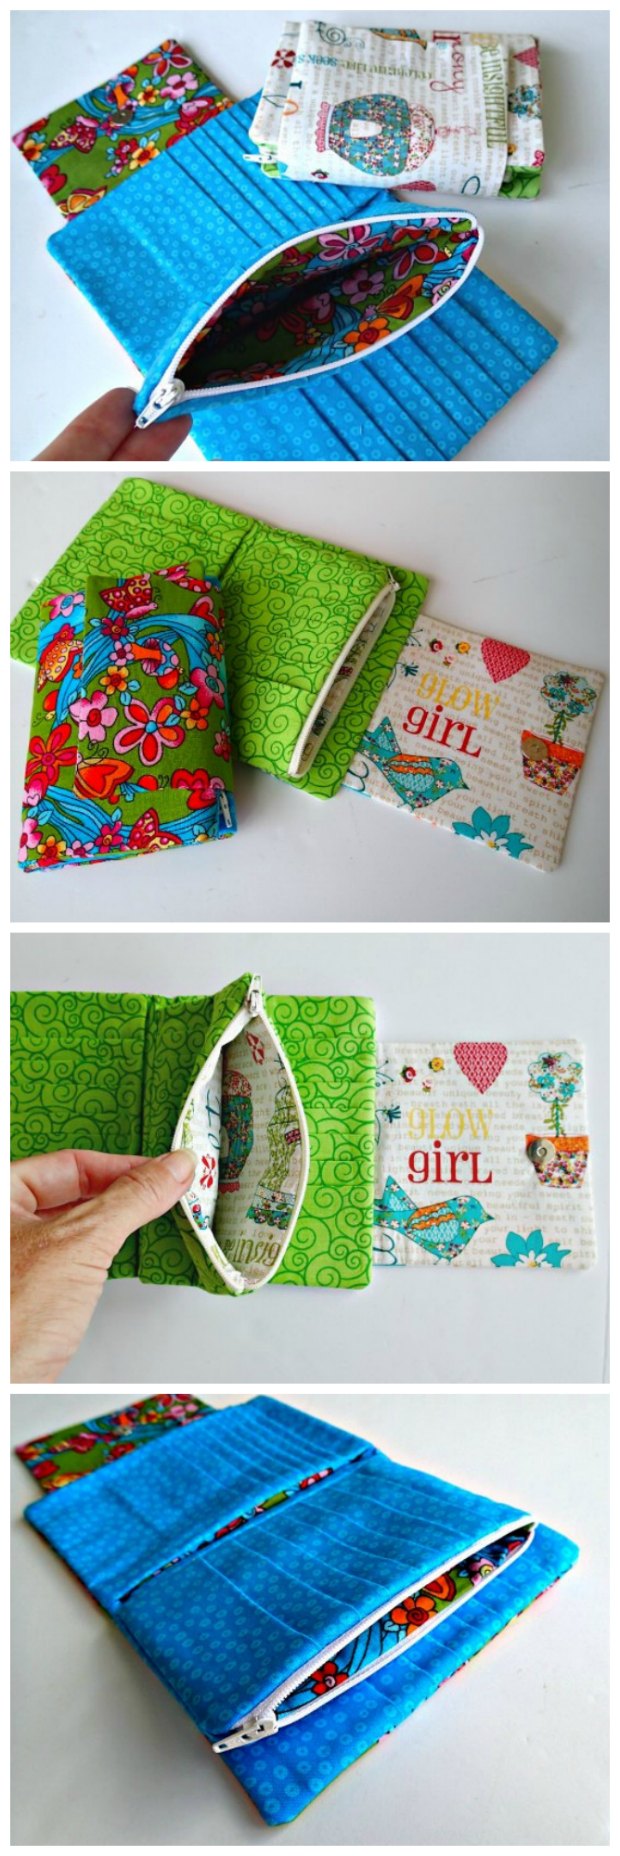 Wallet sewing pattern with room for 28 cards, plus zipper pocket, full width space for notes and even for a small phone. There's a reason this is called the Ultimate wallet!